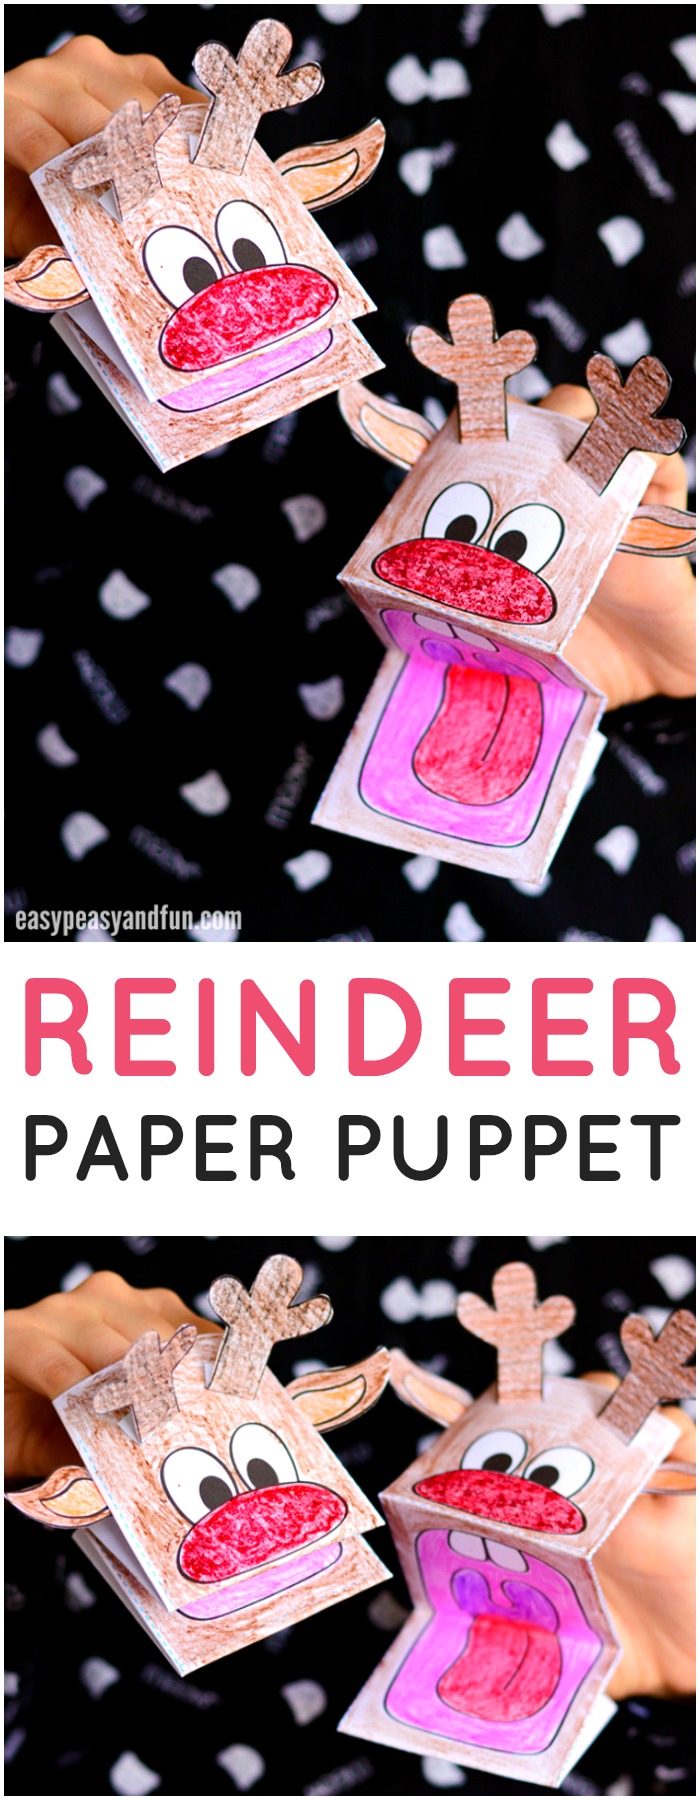 Printable Reindeer Paper Puppet Craft. Fun Christmas craft idea for kids to make.